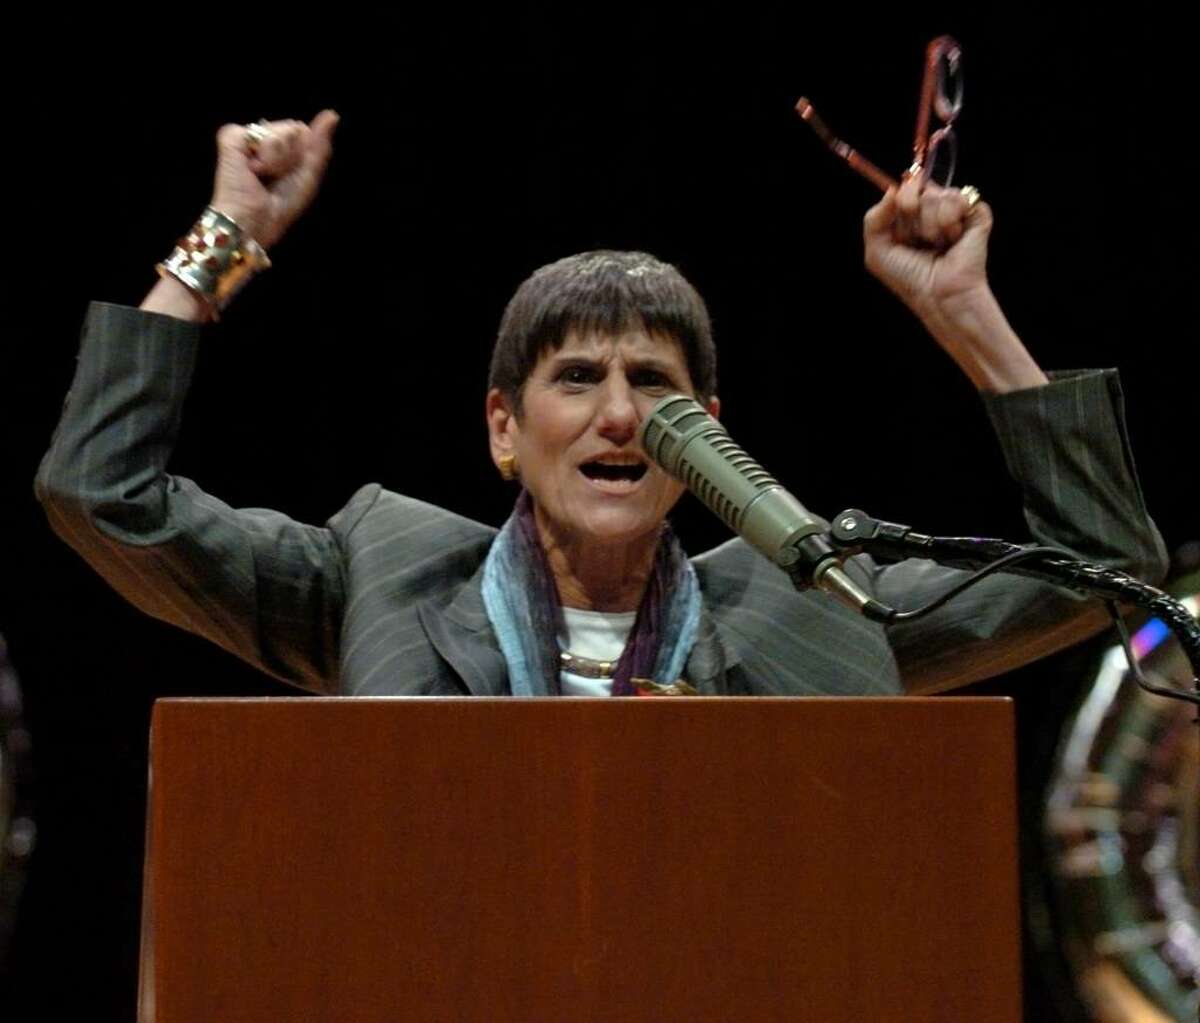 With arms raised U.S. Congresswoman Rosa DeLauro exclaims, "Congratulations!" to the students of Platt Technical School as she begins the key note speech at the school's graduation ceremony in Milford, Conn. on Friday June 11, 2010.